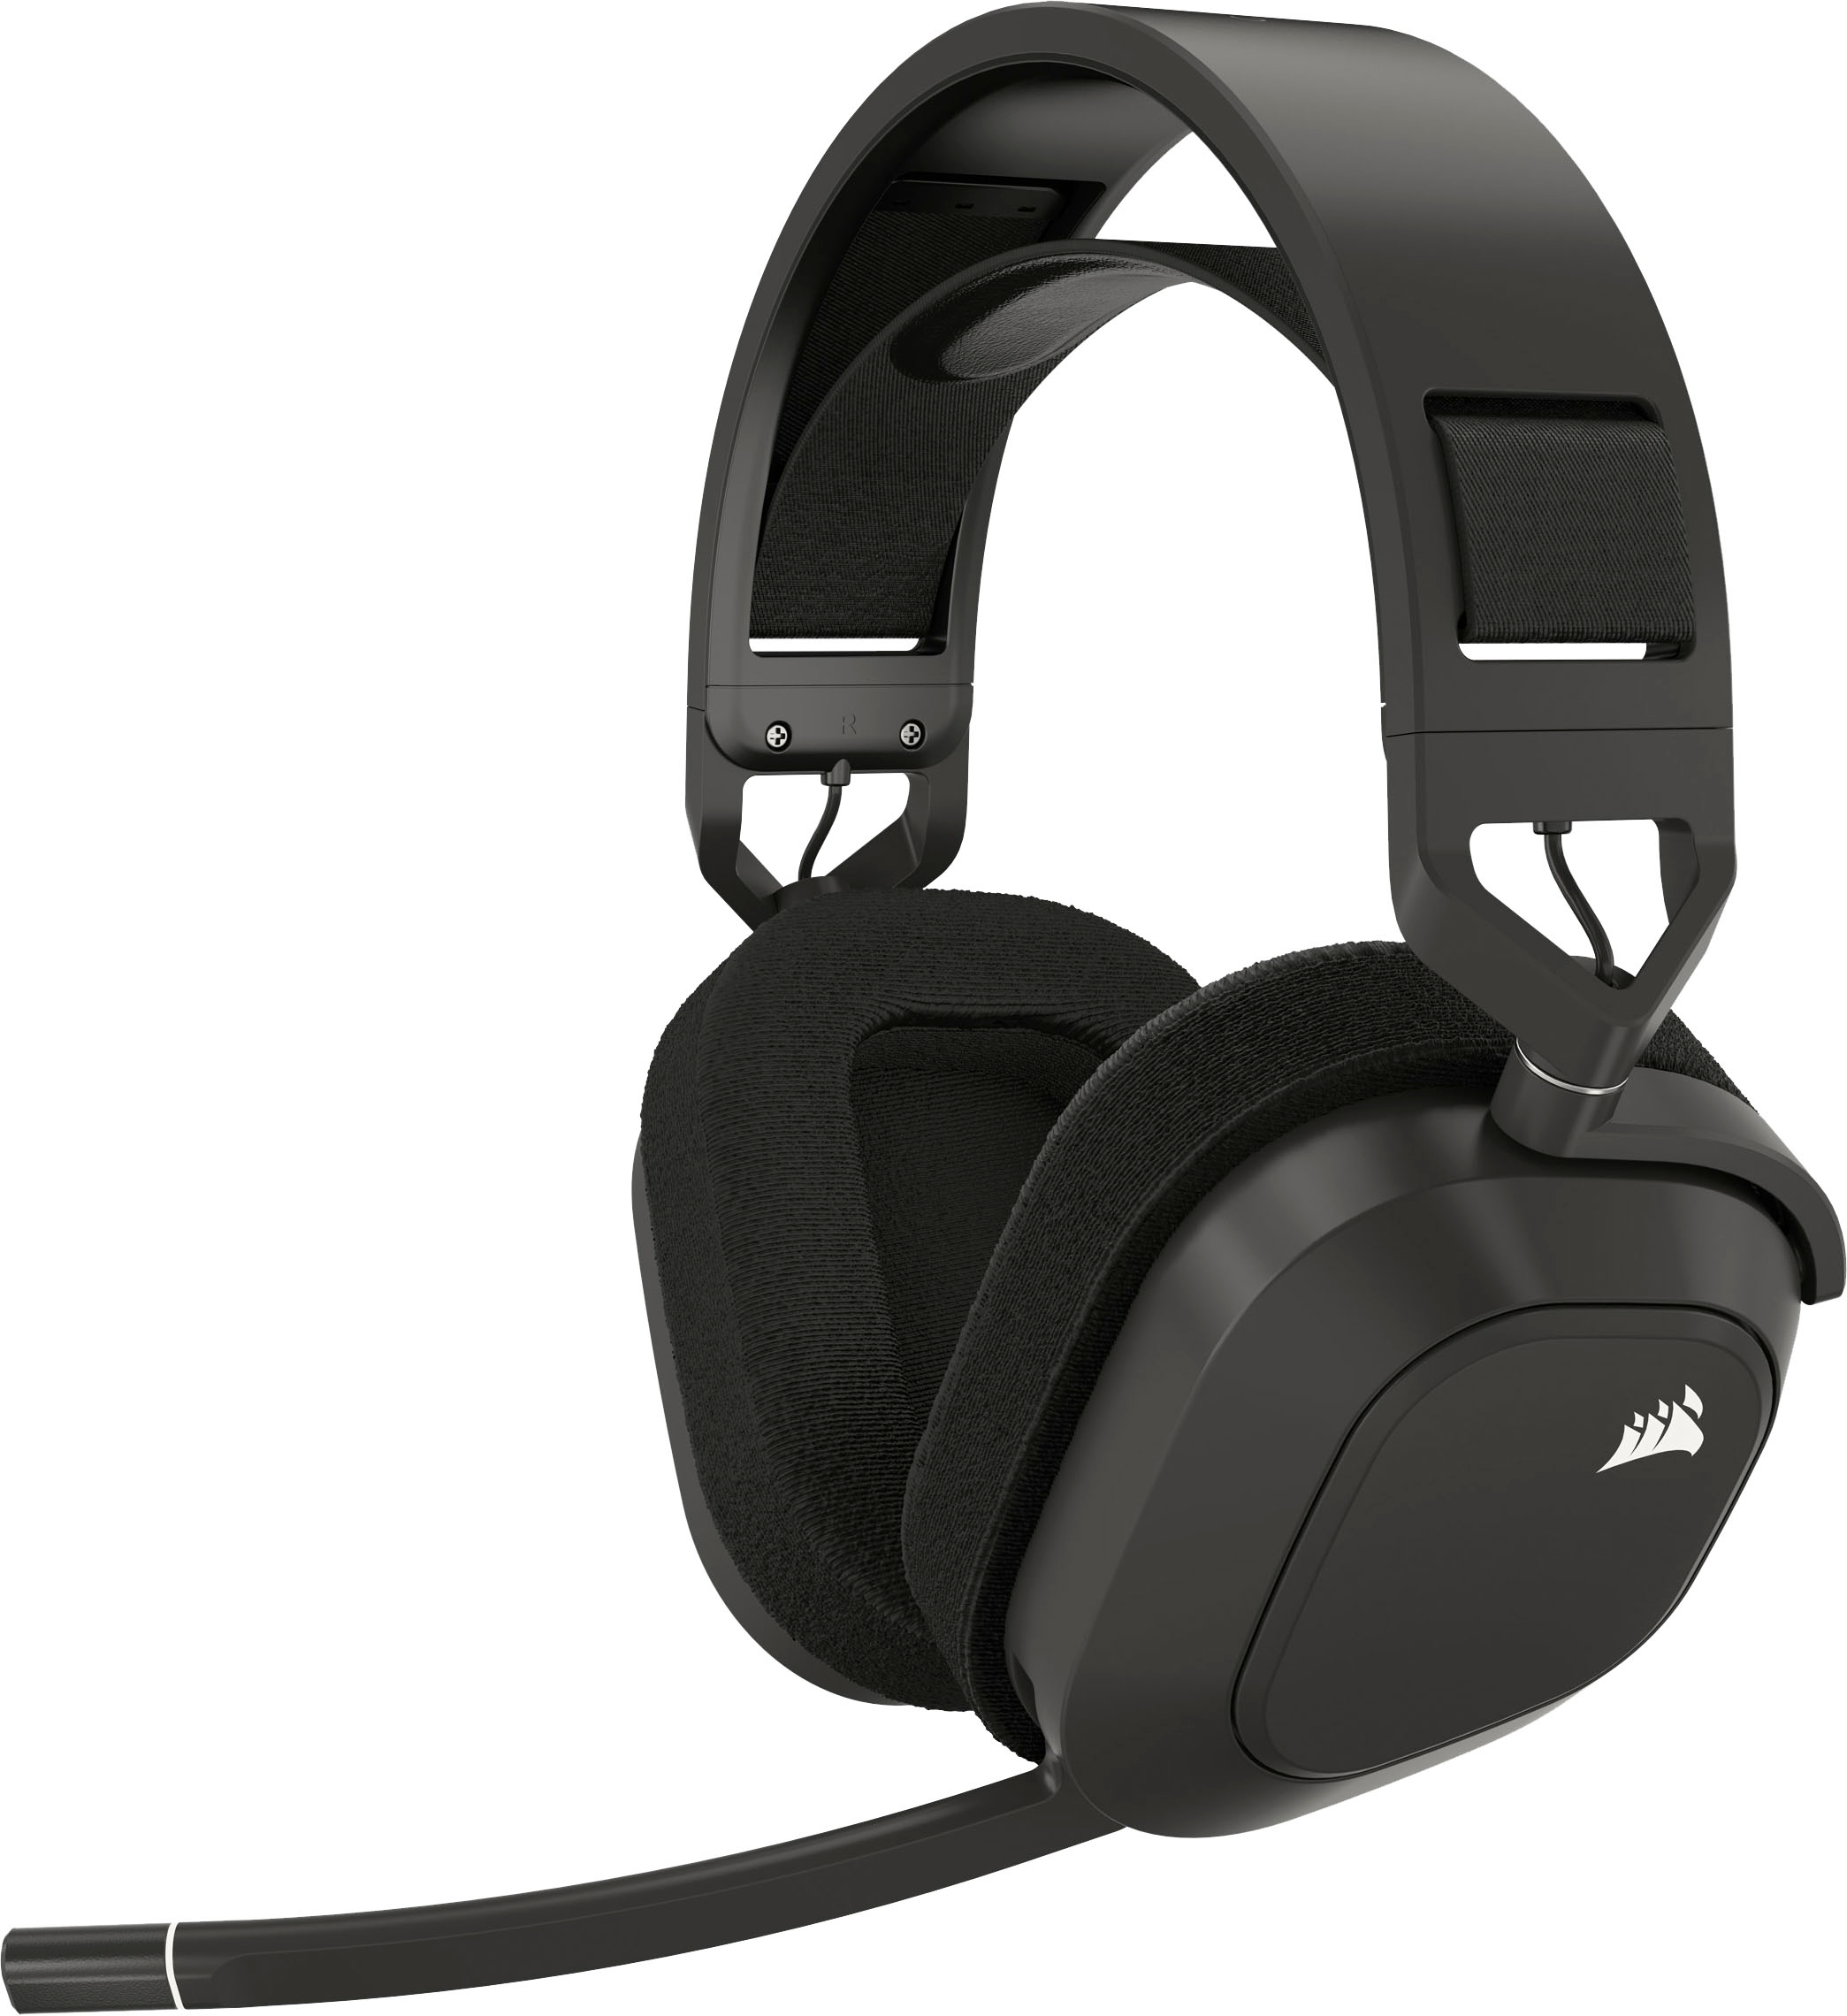 Corsair HS80 Max Wireless gaming headset review